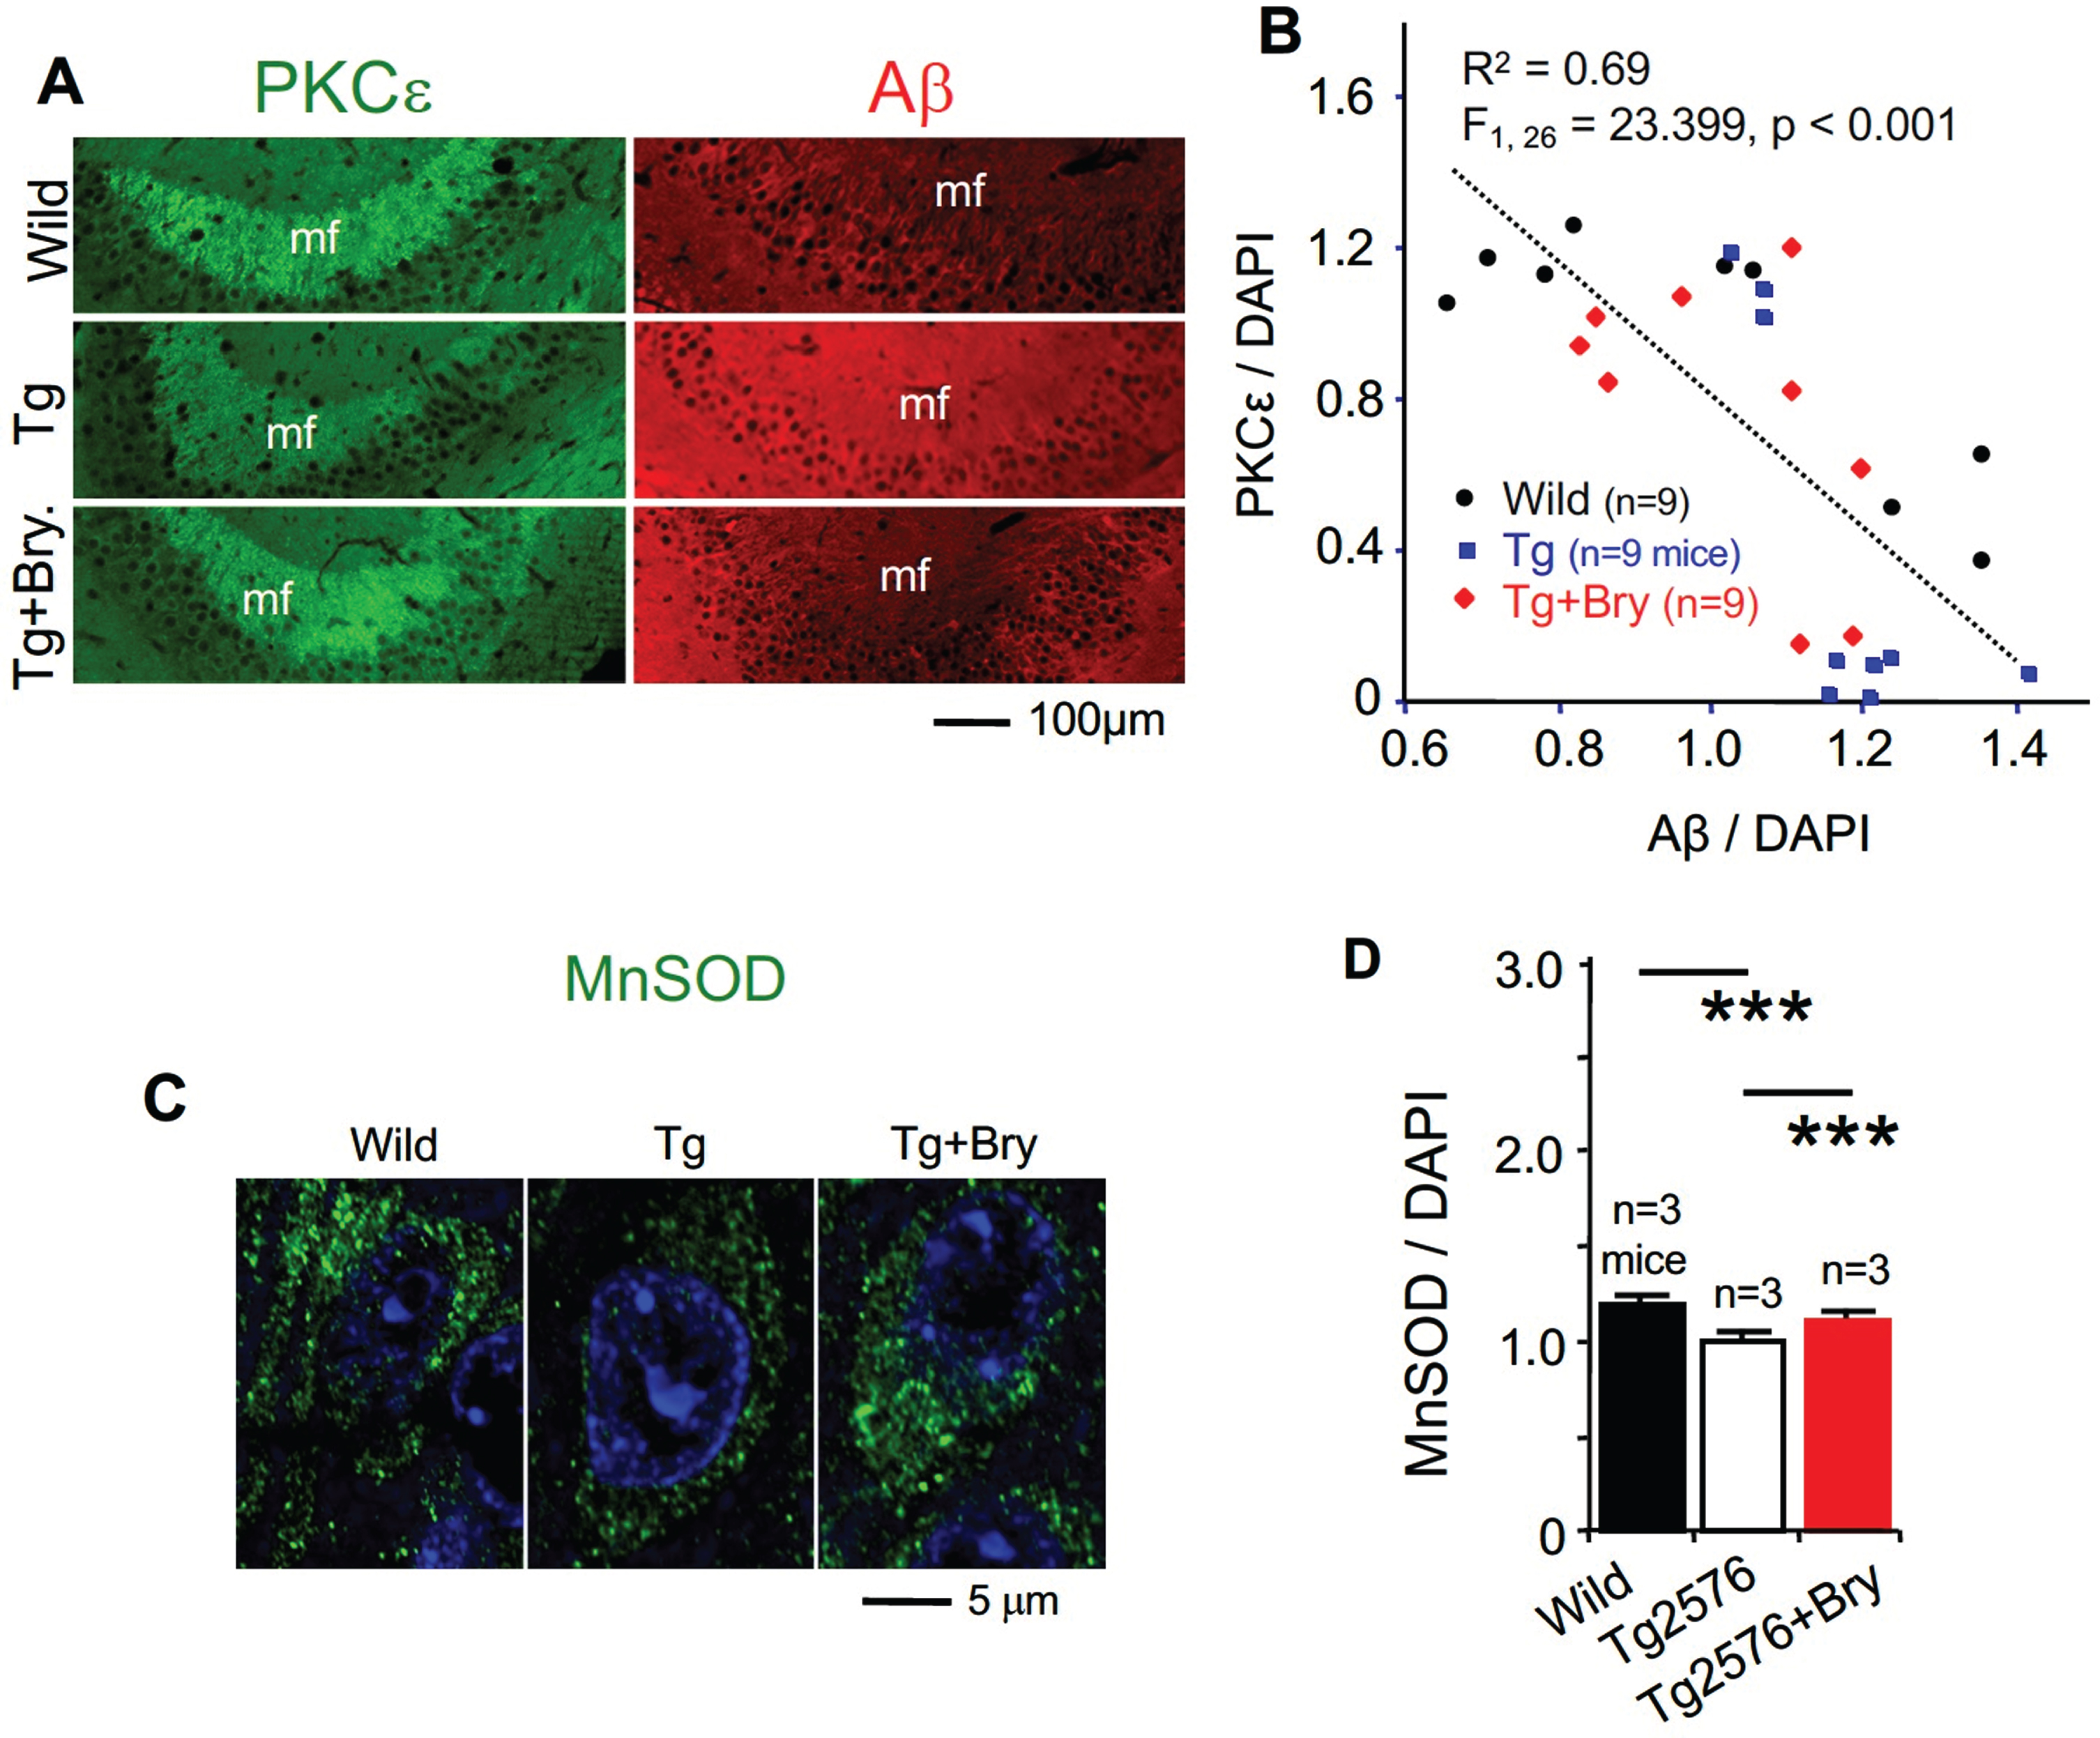 An inverse correlation between PKCɛ and Aβ and effect of PKCɛ activation on MnSOD level in hippocampal neurons from Tg2576 transgenic AD mice. Tg2576 (Tg) and wild-type (Wild) control mice at 8 weeks of age were treated with or without the PKCɛ activator bryostatin (Bry, 30μg/kg, ip, 2 times per week) for a 12-week period. (A) Immunohistochemistry and confocal microscopy demonstrated (B) an inverse correlation between Aβ and PKCɛ in mossy fibers. Data are represented as mean, n = 9 mice per condition and 3–4 measurements per mouse (C) Immunohistochemistry showed that (D) the reduction of MnSOD was prevented with bryostatin 1 in the cell bodies of the CA1 hippocampal pyramidal neurons. Data are represented as mean±SEM, n = 3 mice (59–70 neurons per mouse). Data were divided by DAPI (4’,6-diamidino-2-phenylindole) staining, ***p < 0.005; one-way ANOVA, post hoc Tukey’s multiple comparison test.